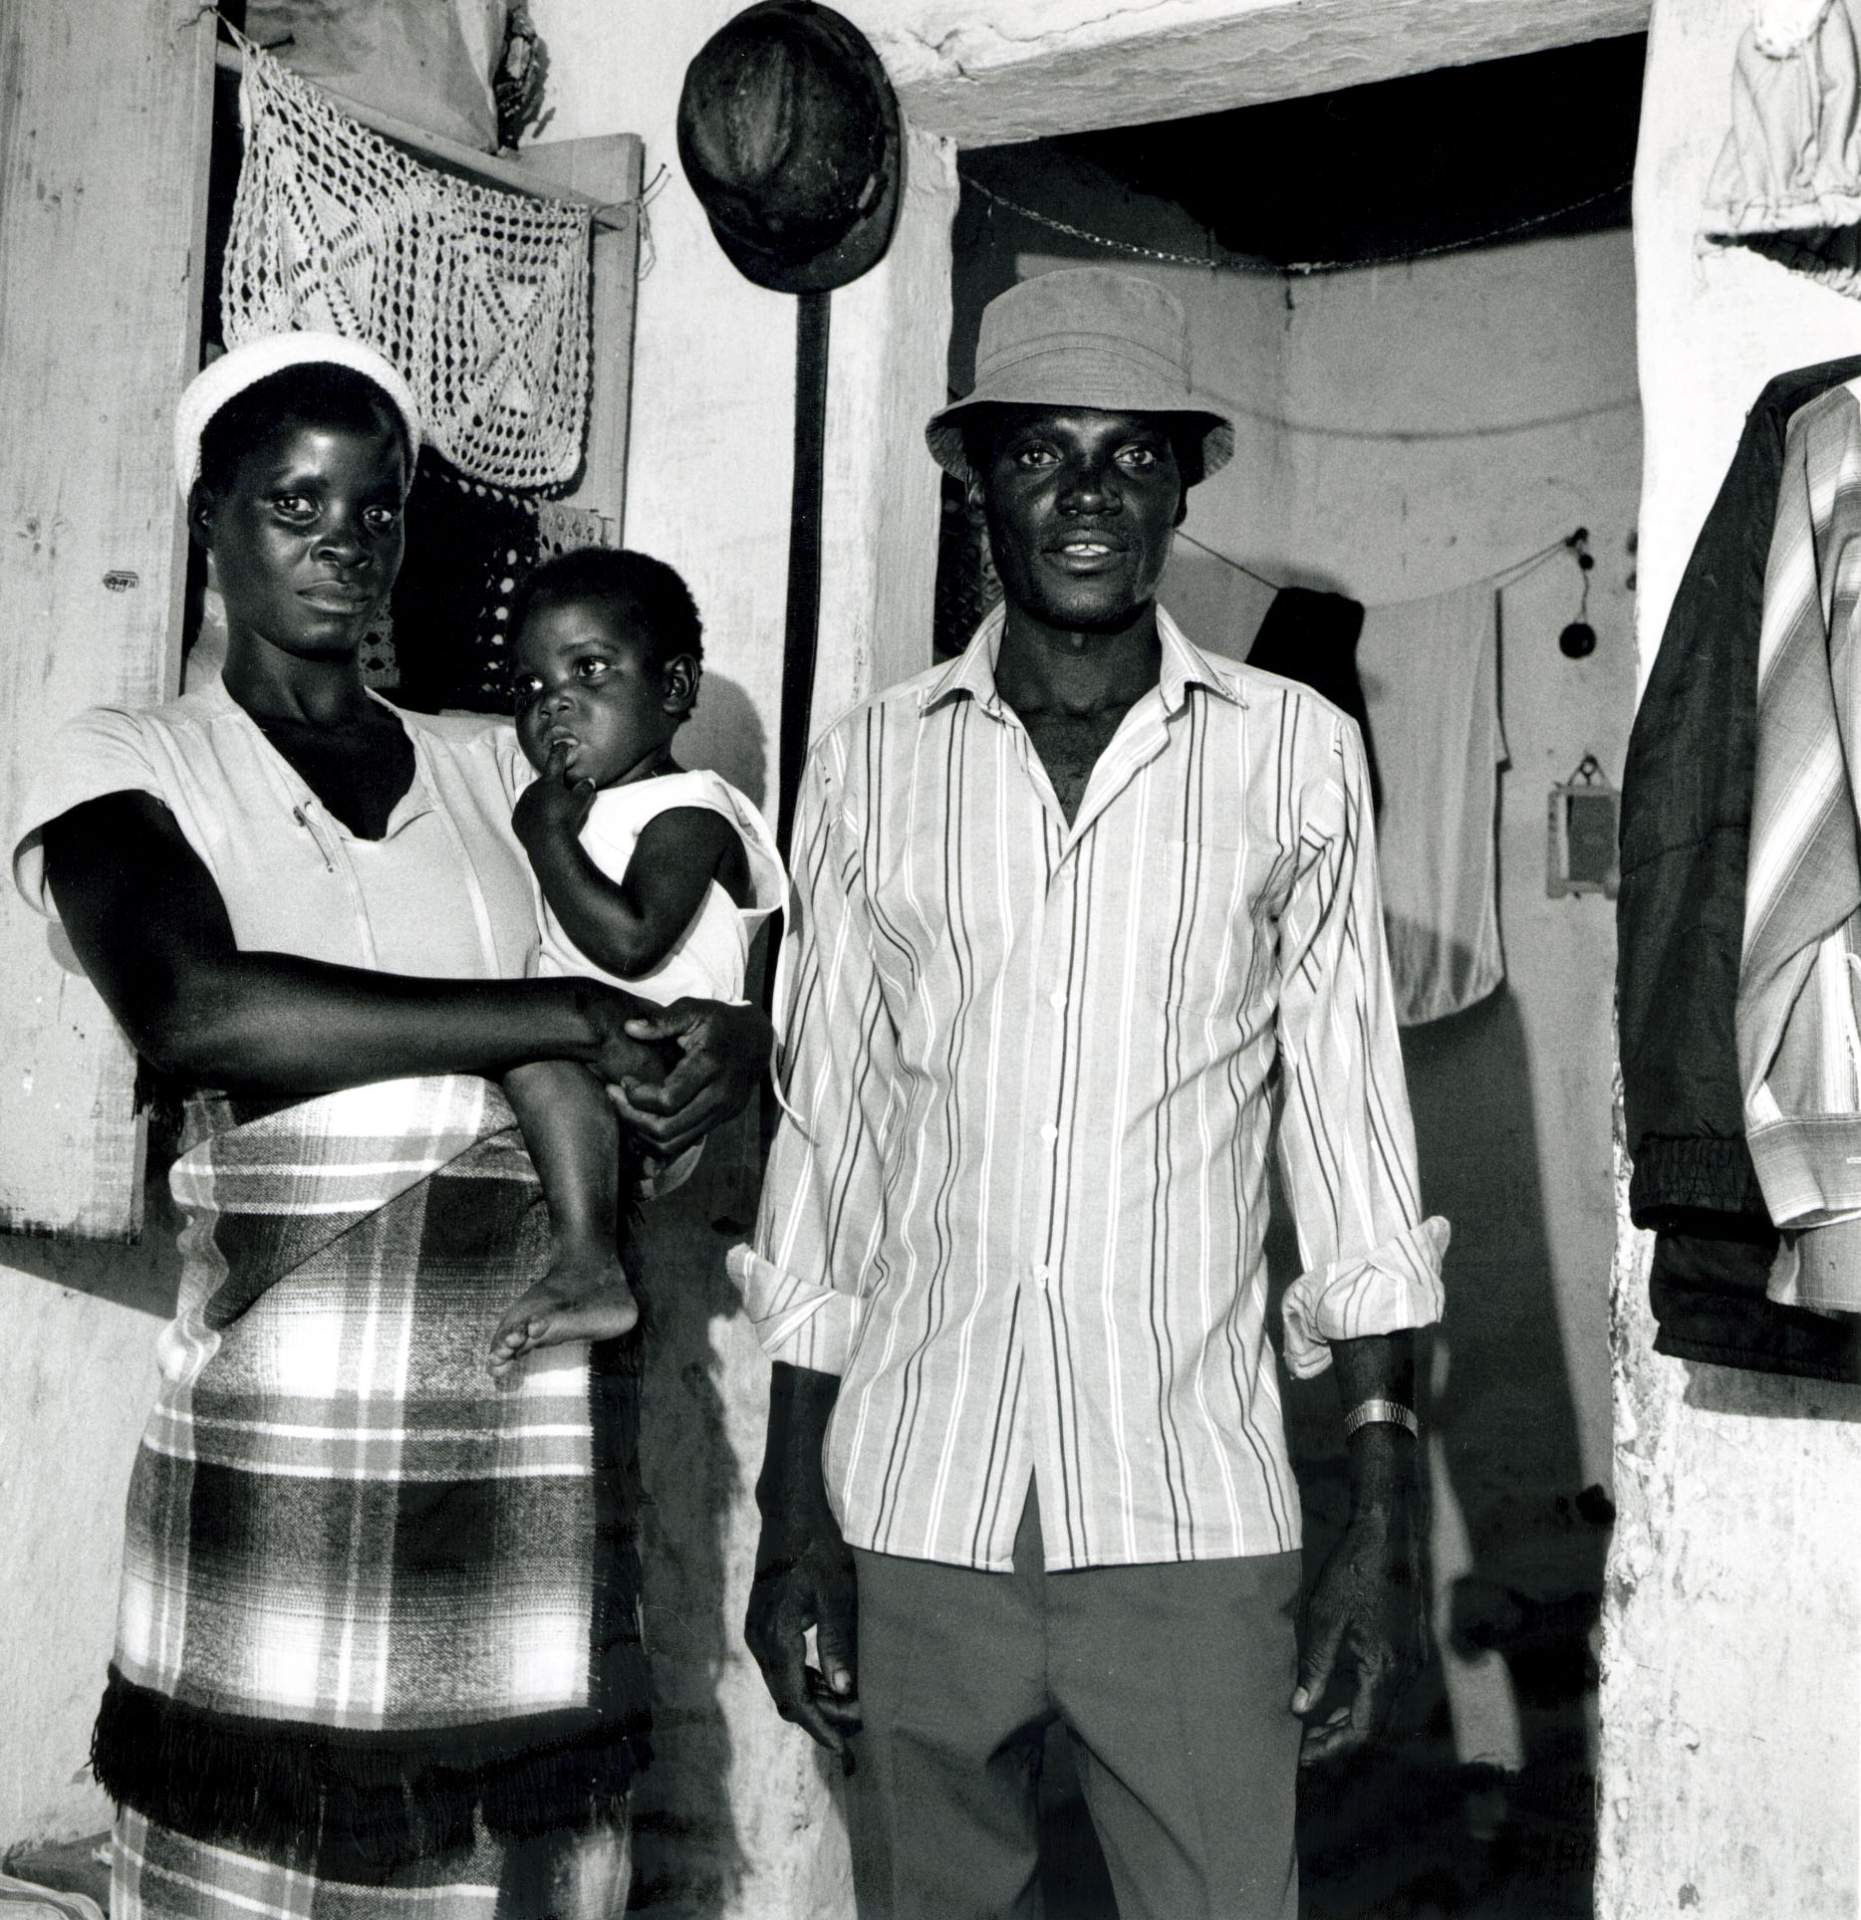 Untitled, From the Series Miners [Zimbabwe] 37-9